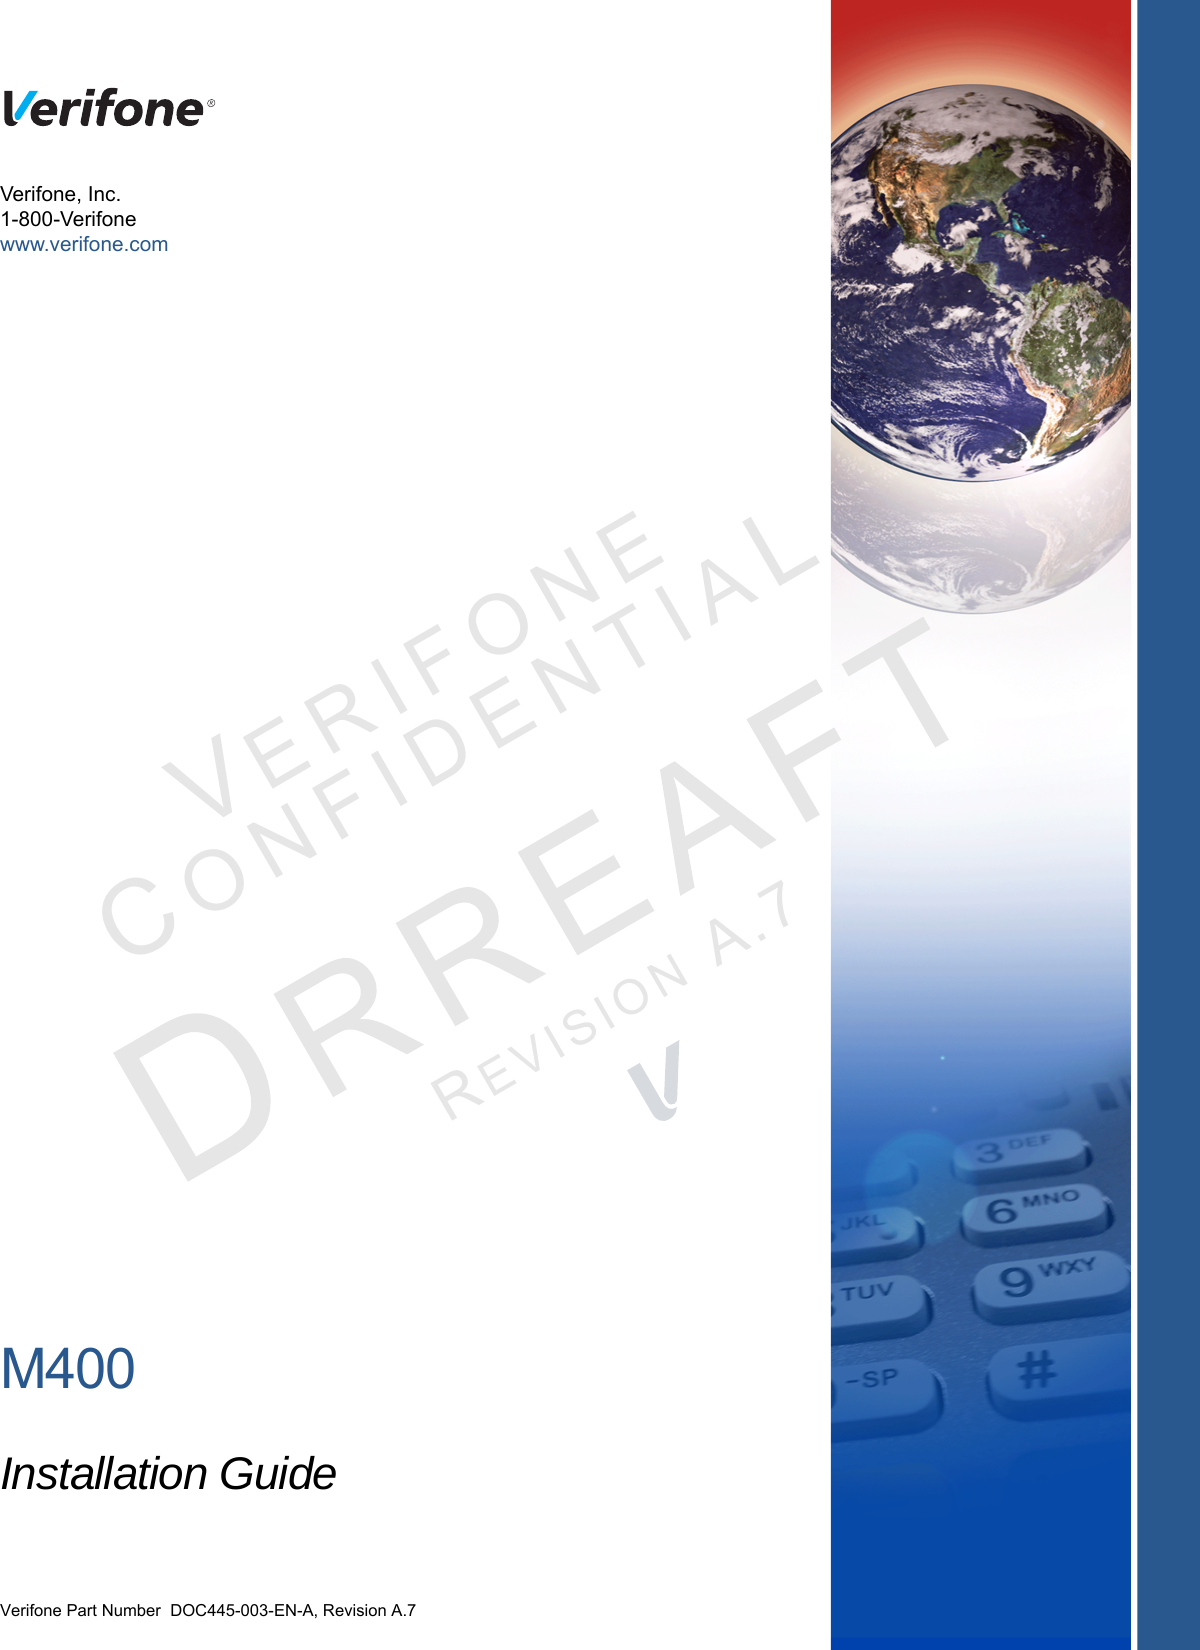 M400Installation GuideVerifone Part Number  DOC445-003-EN-A, Revision A.7Verifone, Inc.1-800-Verifonewww.verifone.comVERIFONECONFID E NTIALREVISIO N  A.7 